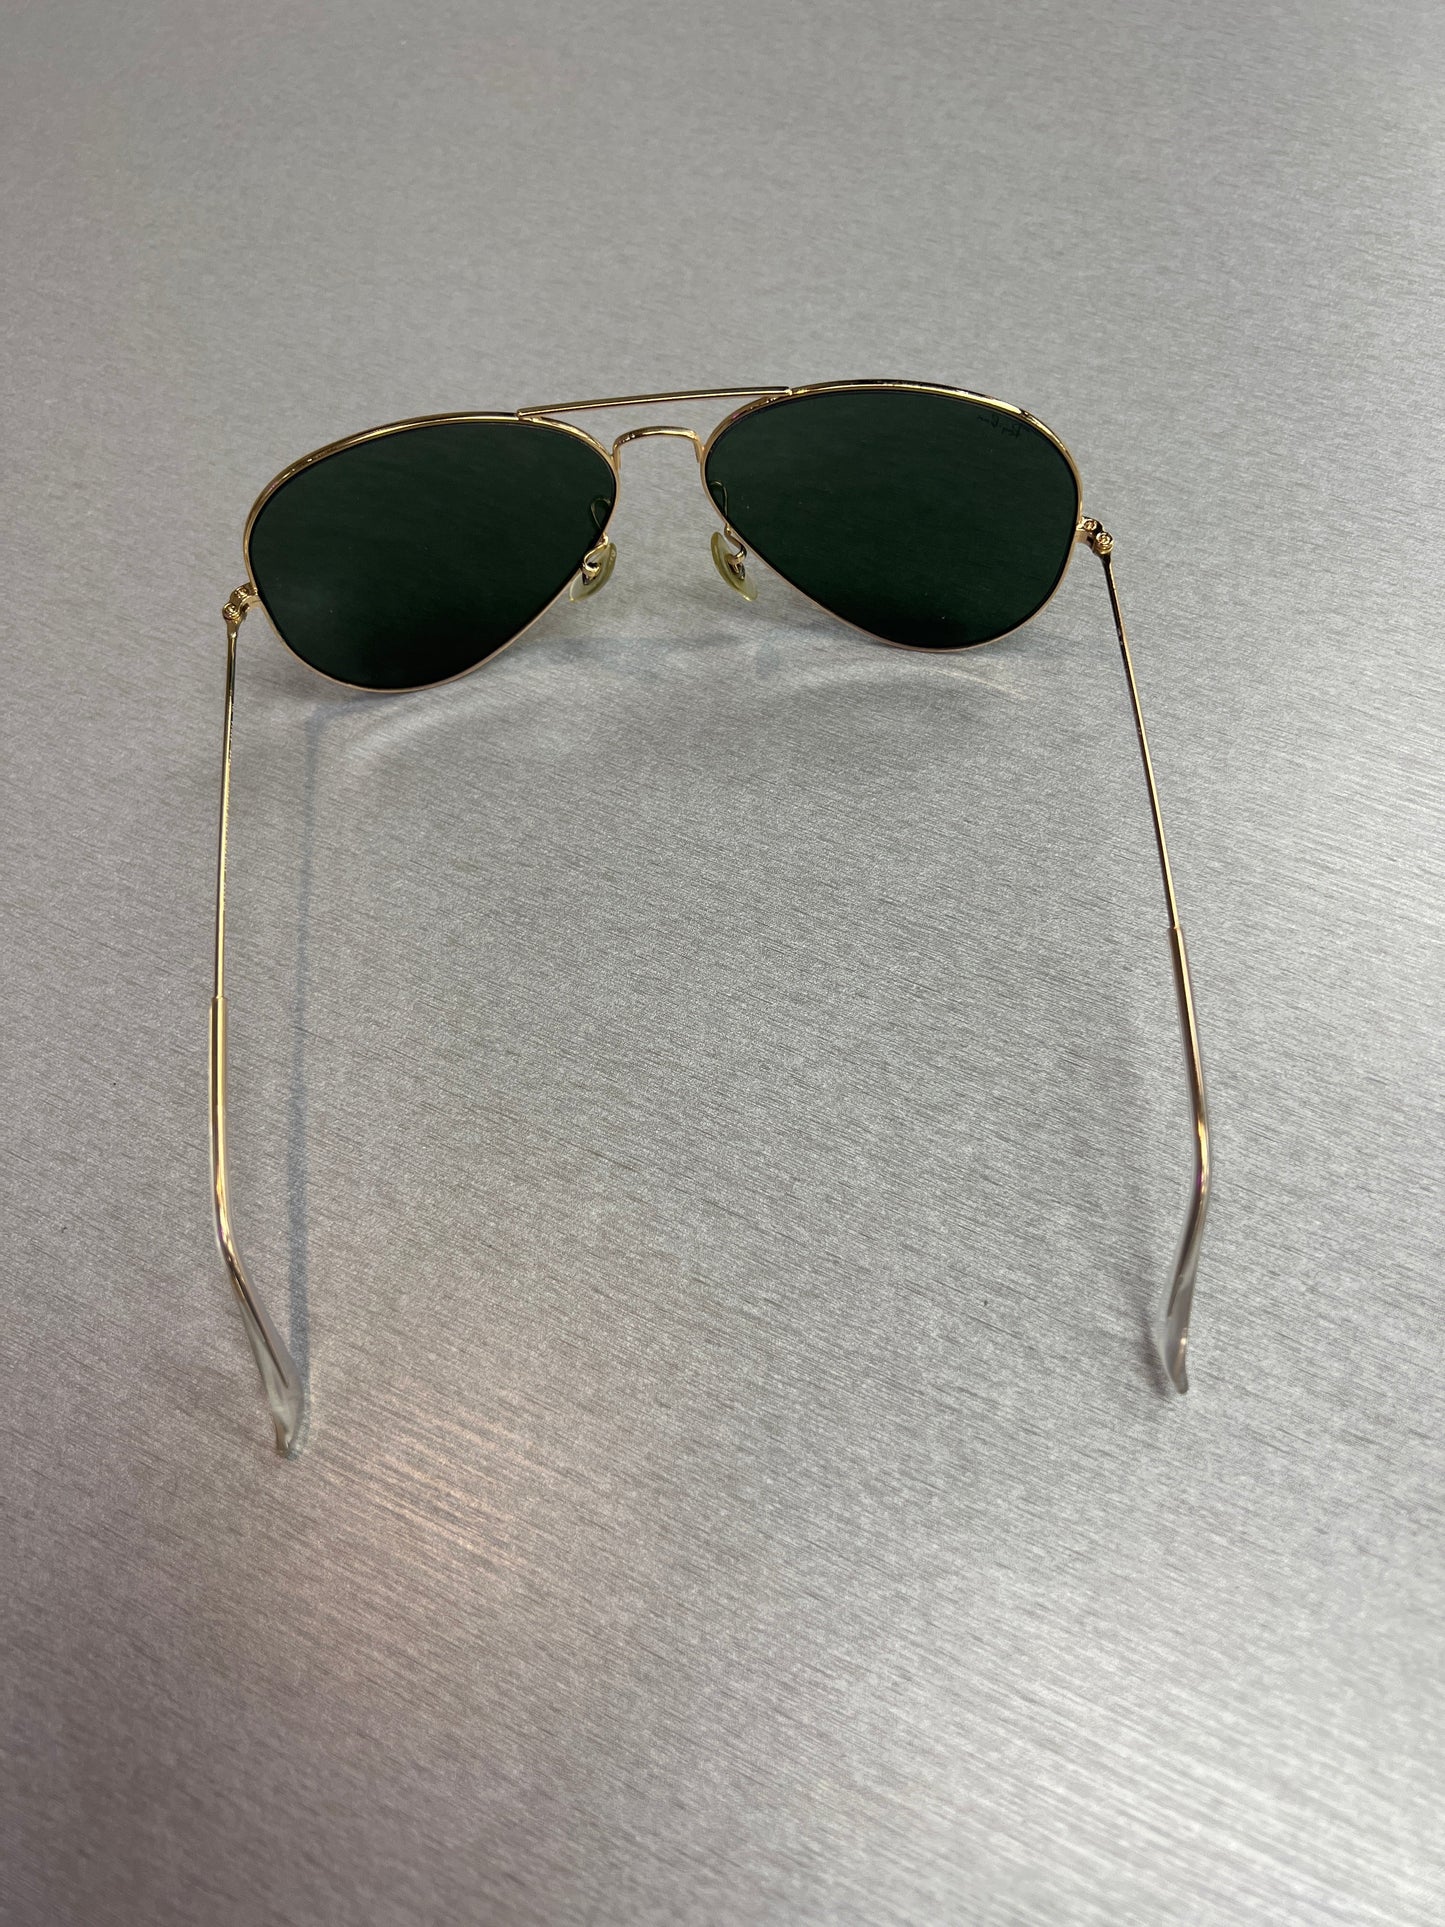 Sunglasses By Ray Ban